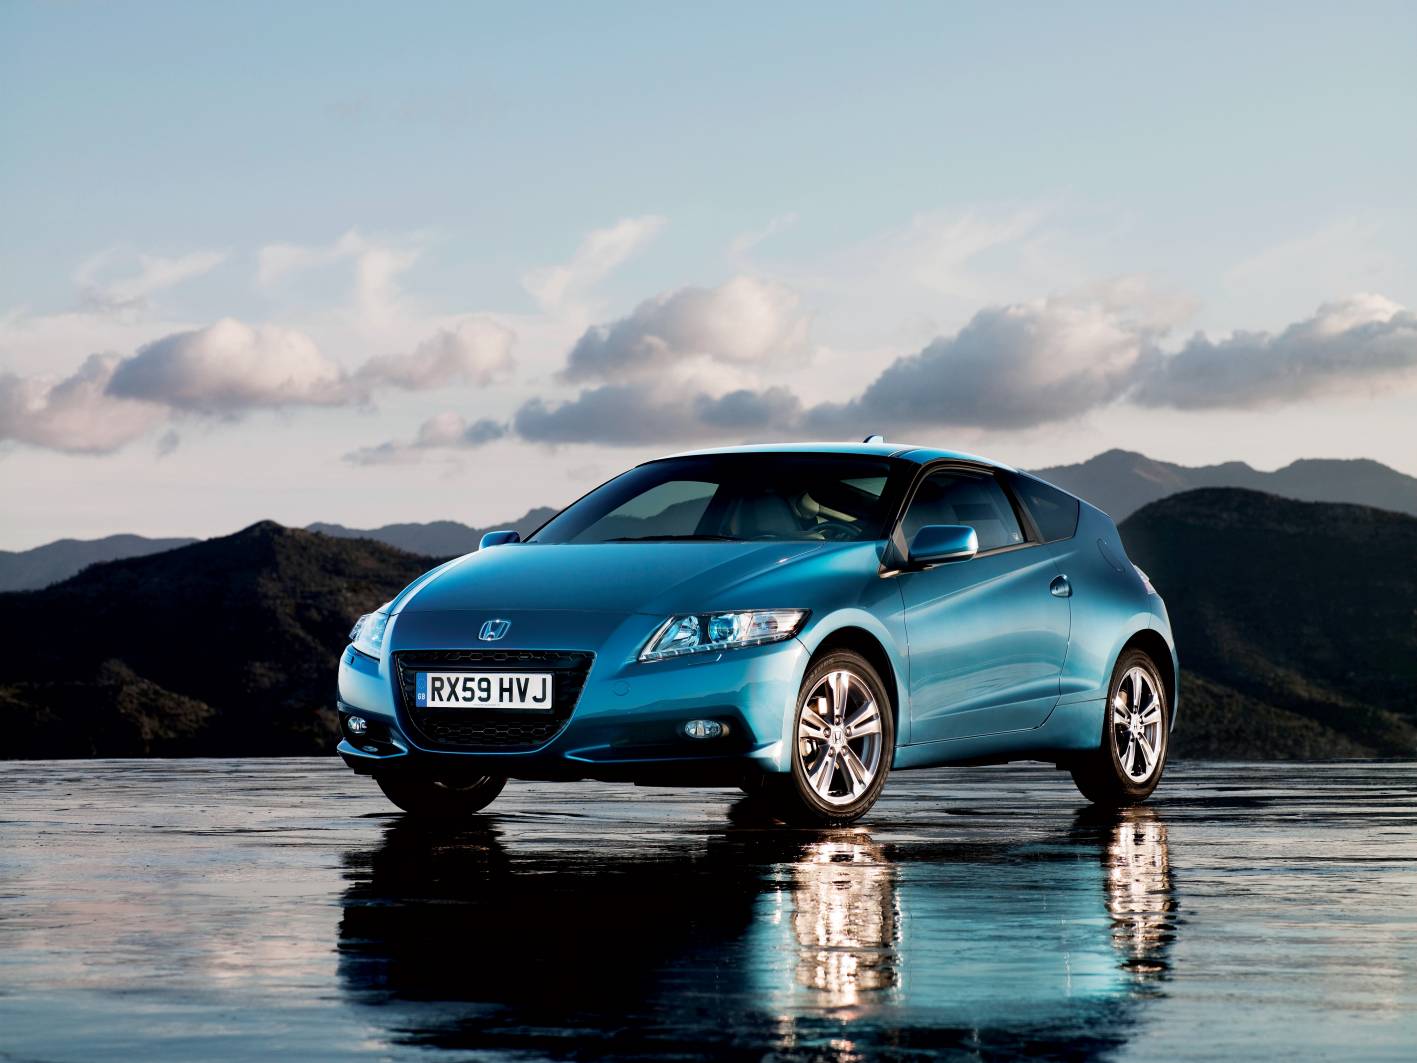 News - 2011 Honda CRZ Review and First Drive